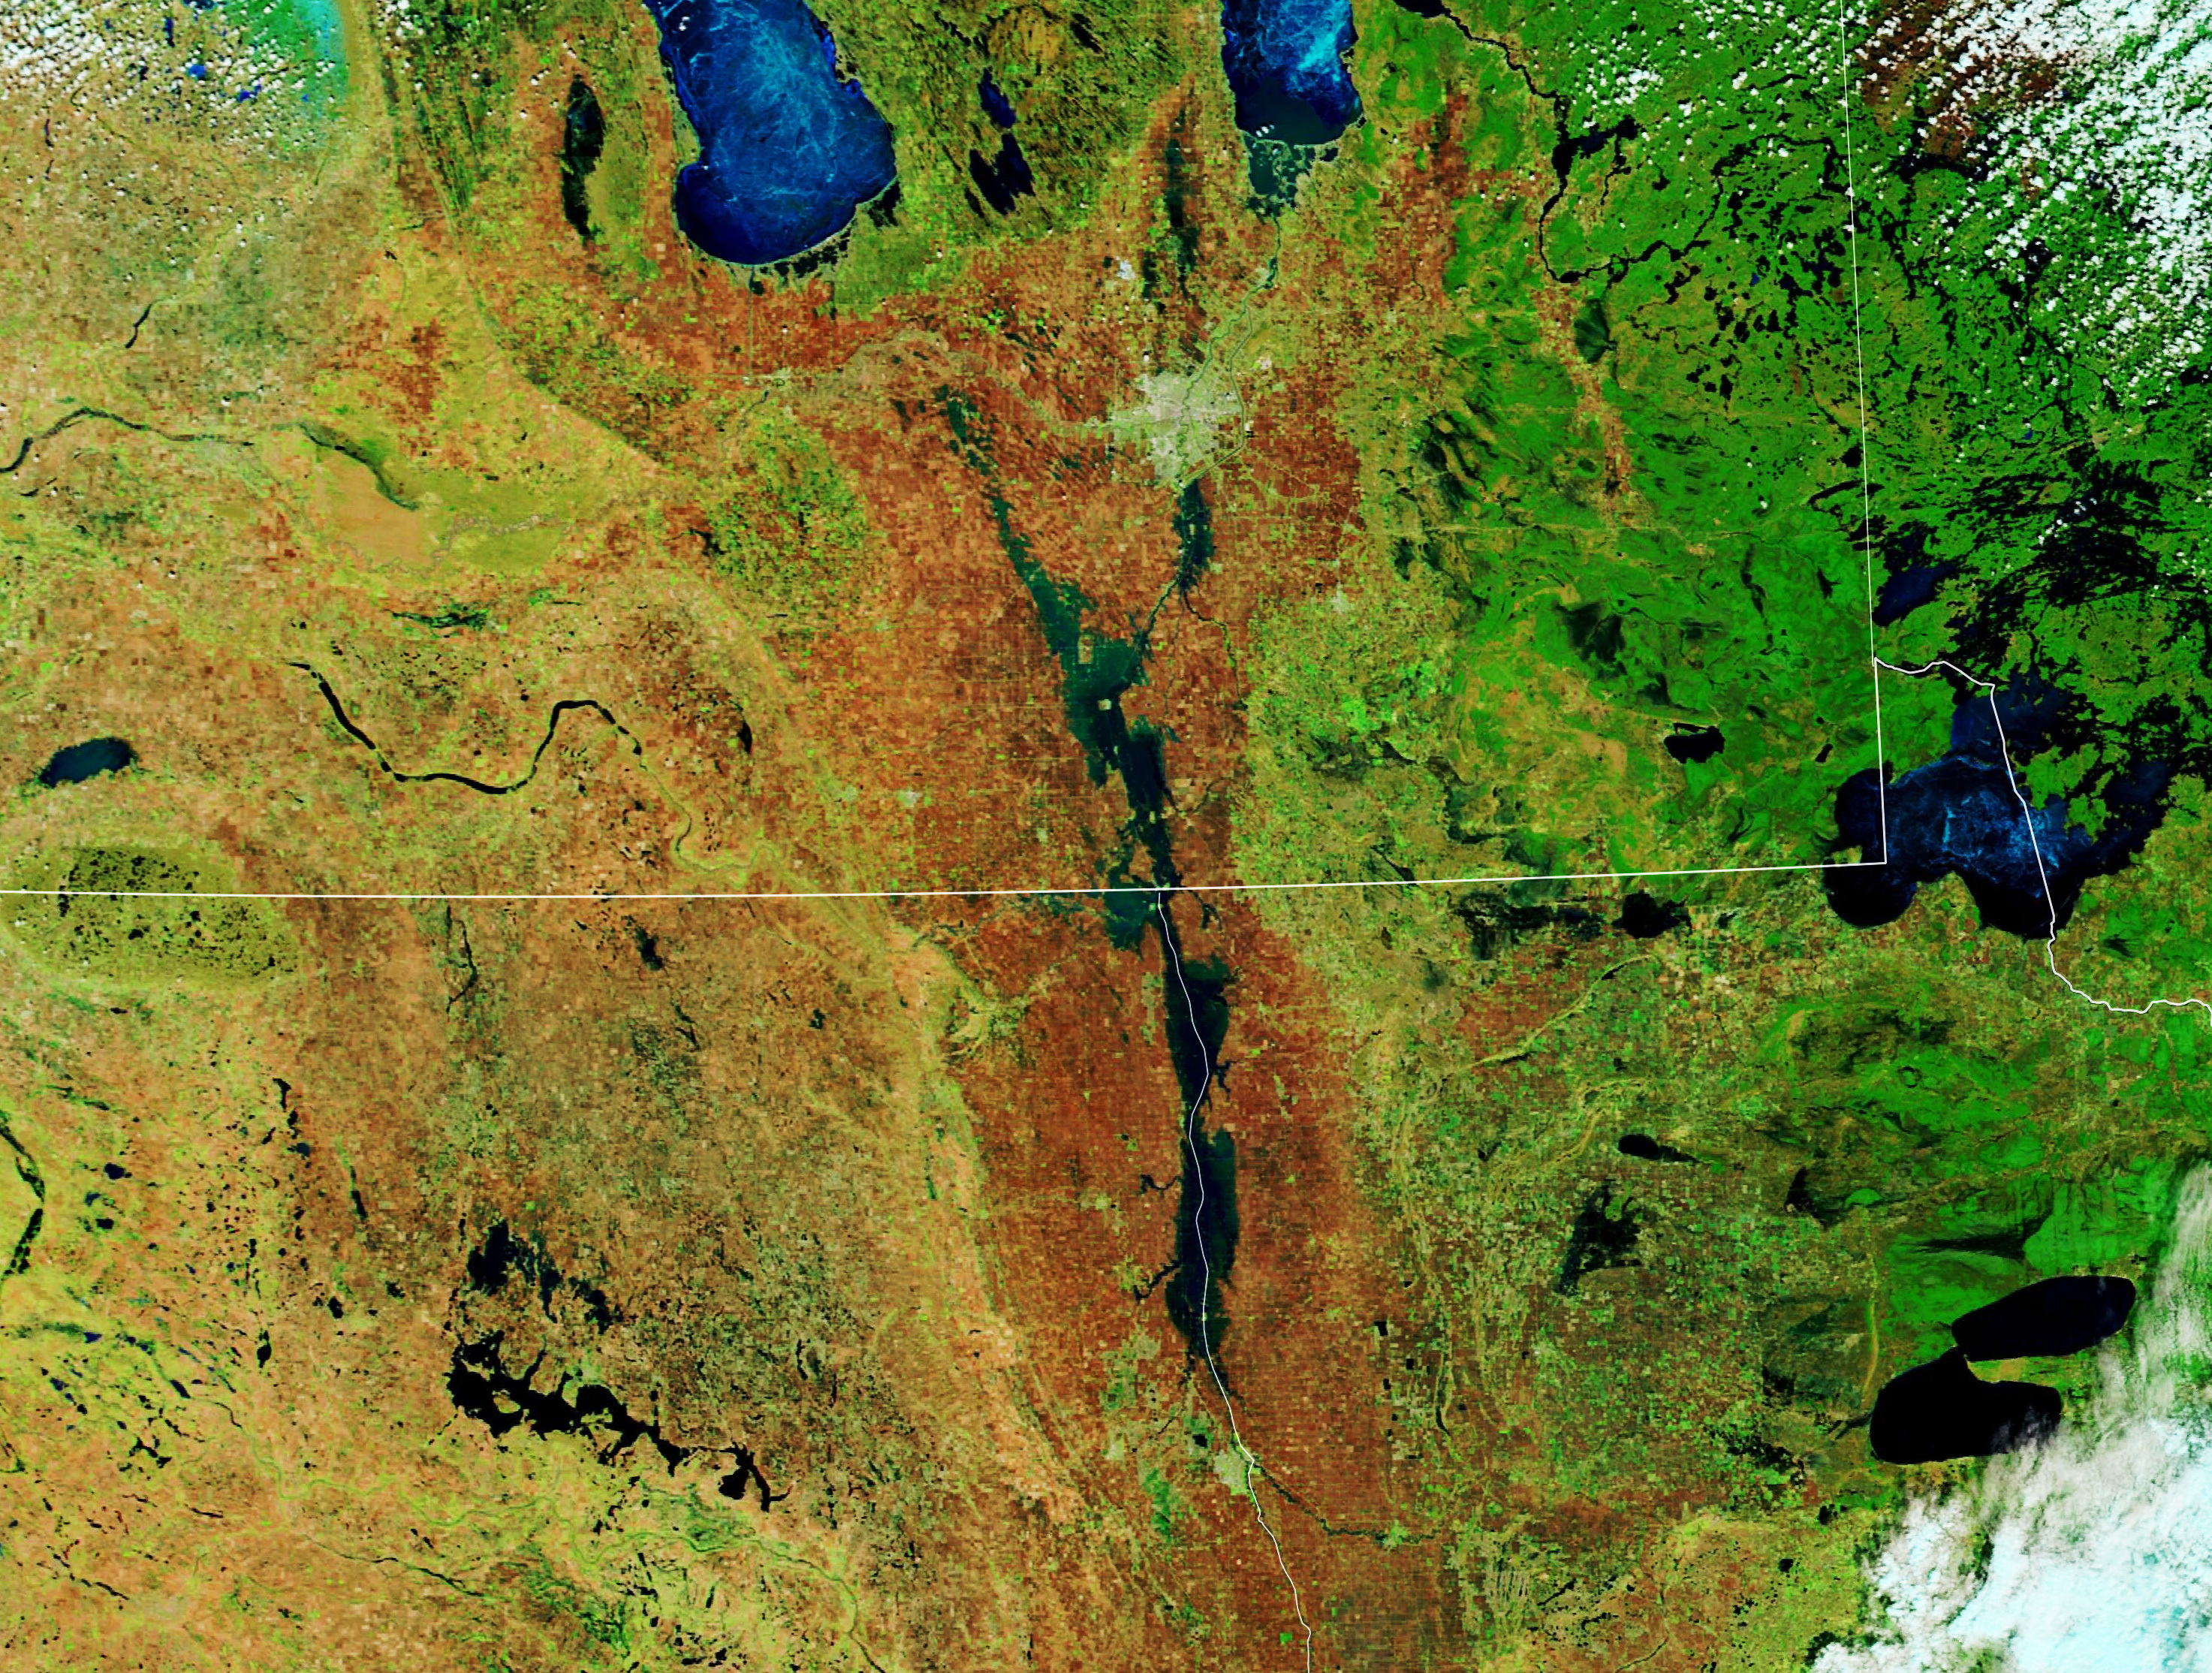 Red River Flooding is Worst in a Decade - related image preview